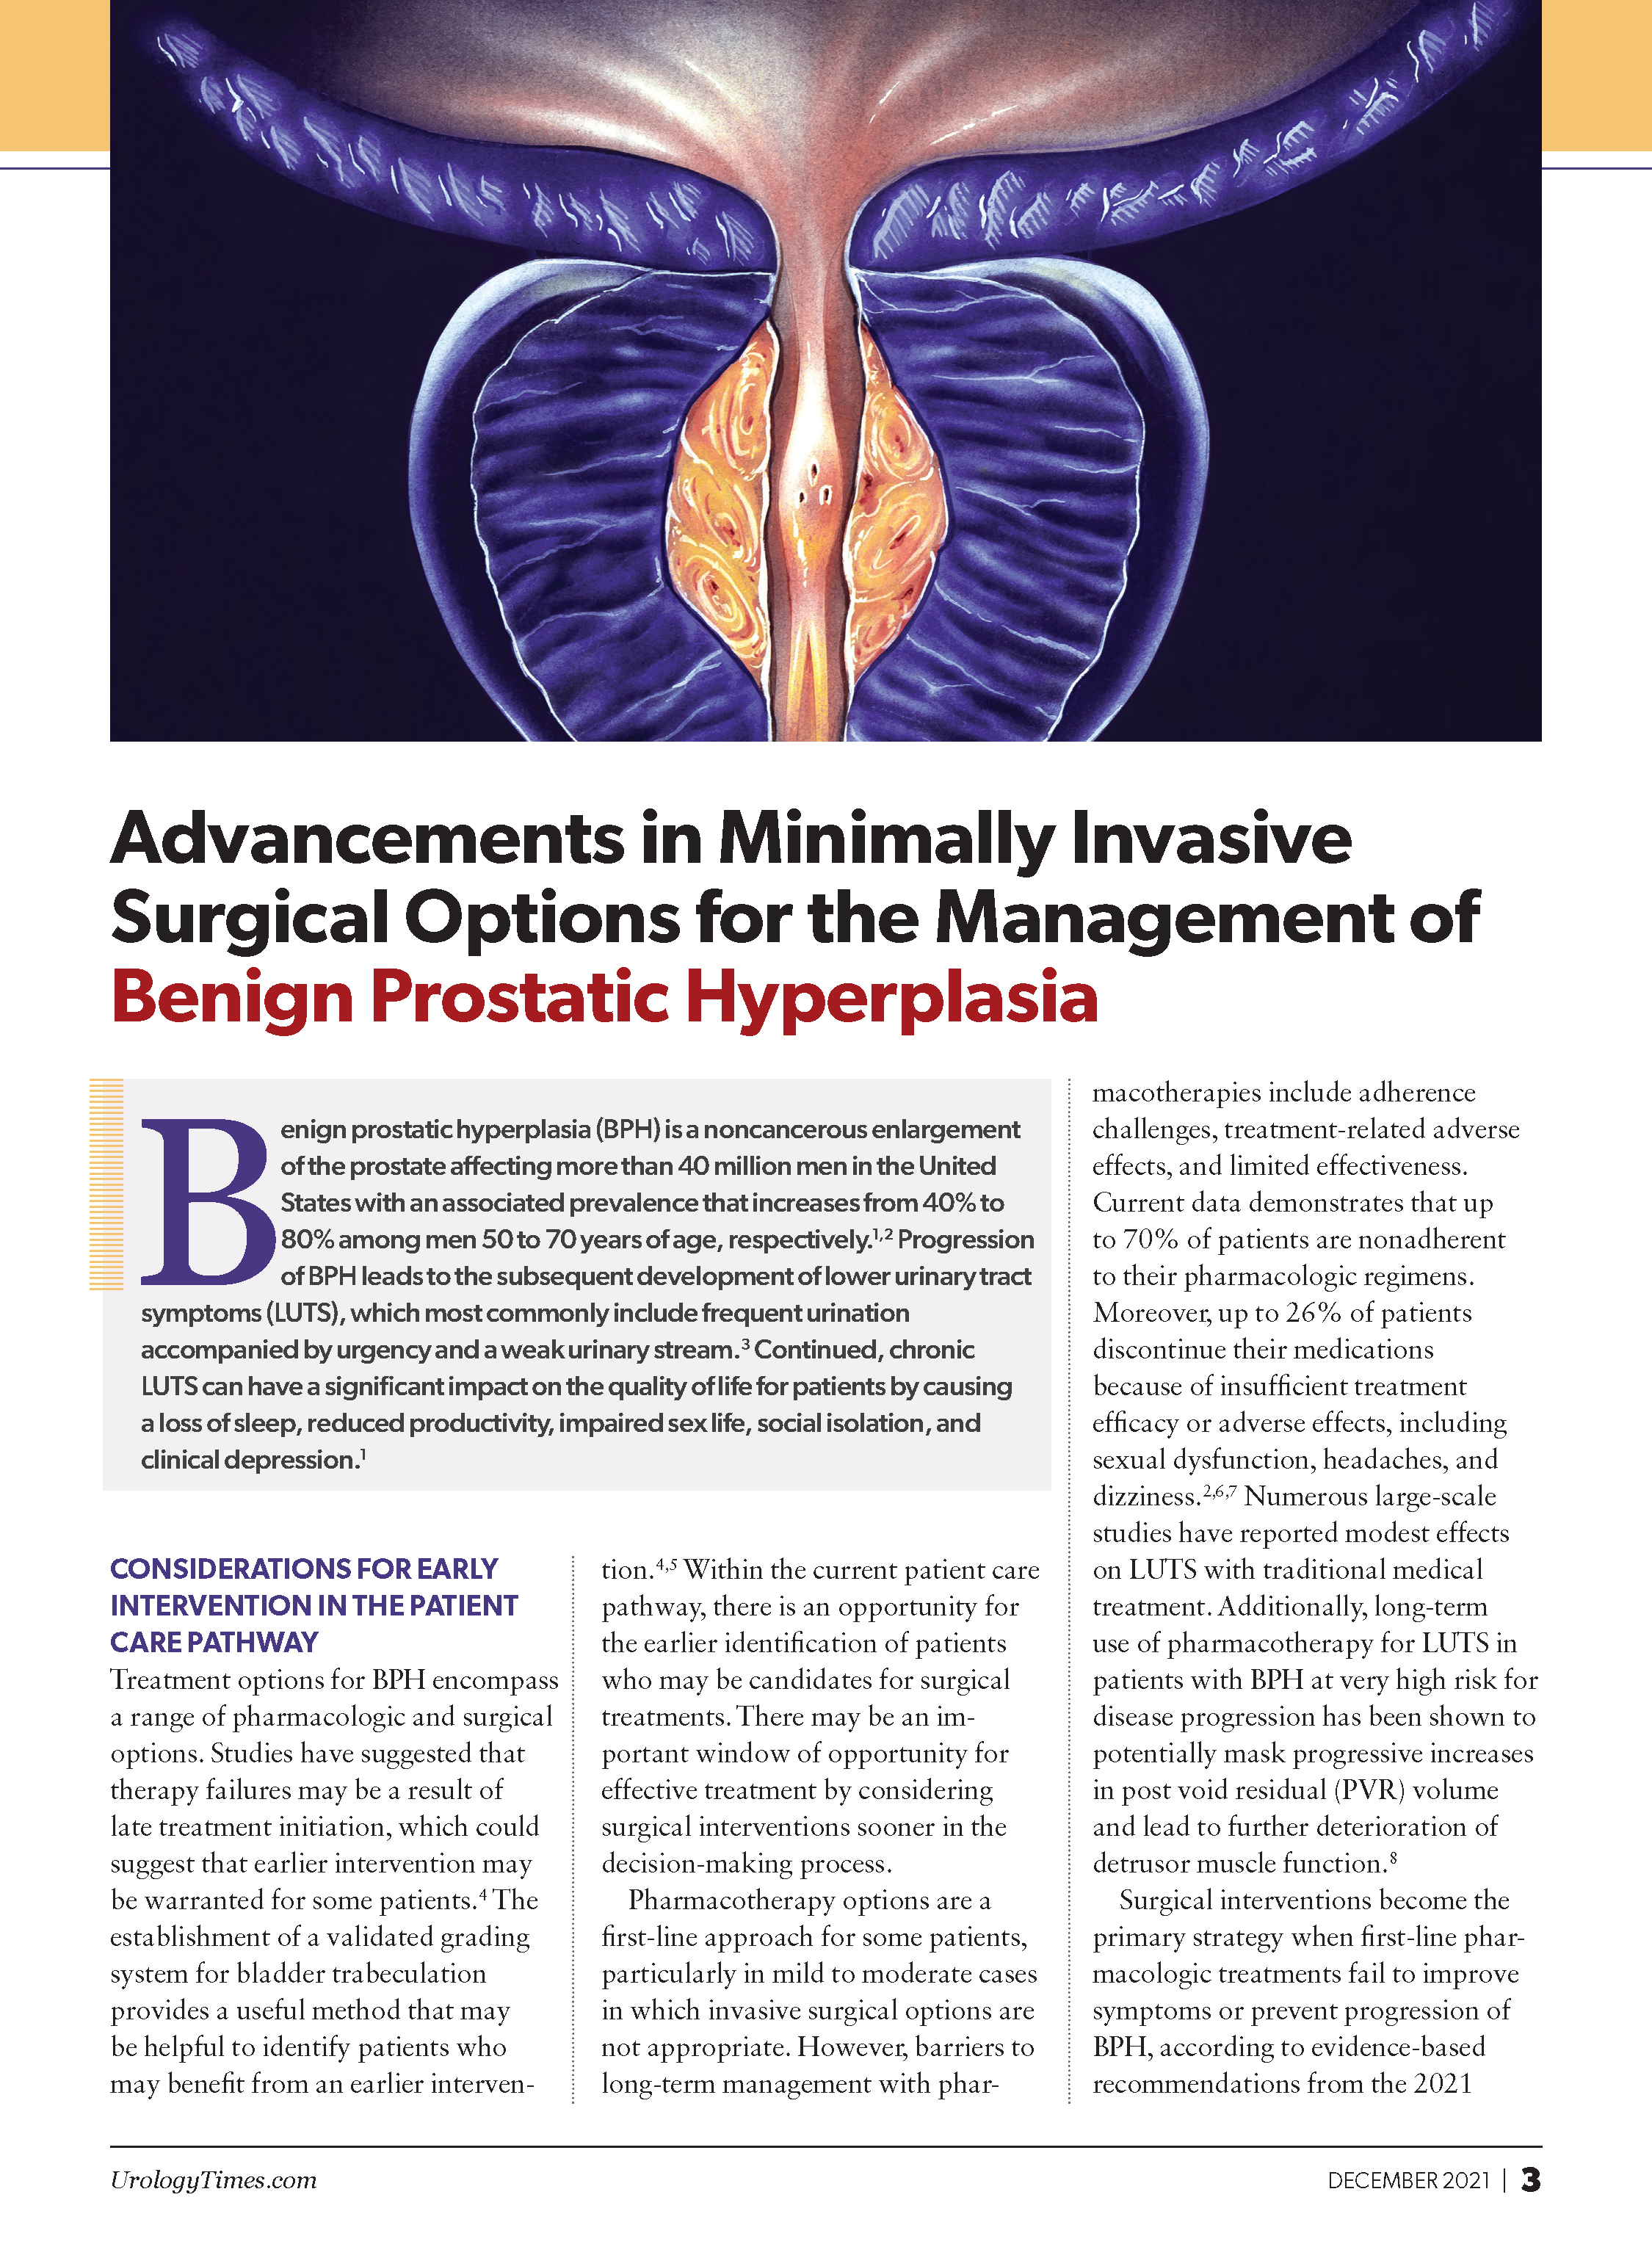 Advancements in Minimally Invasive Surgical Options for the Management of Benign Prostatic Hyperplasia